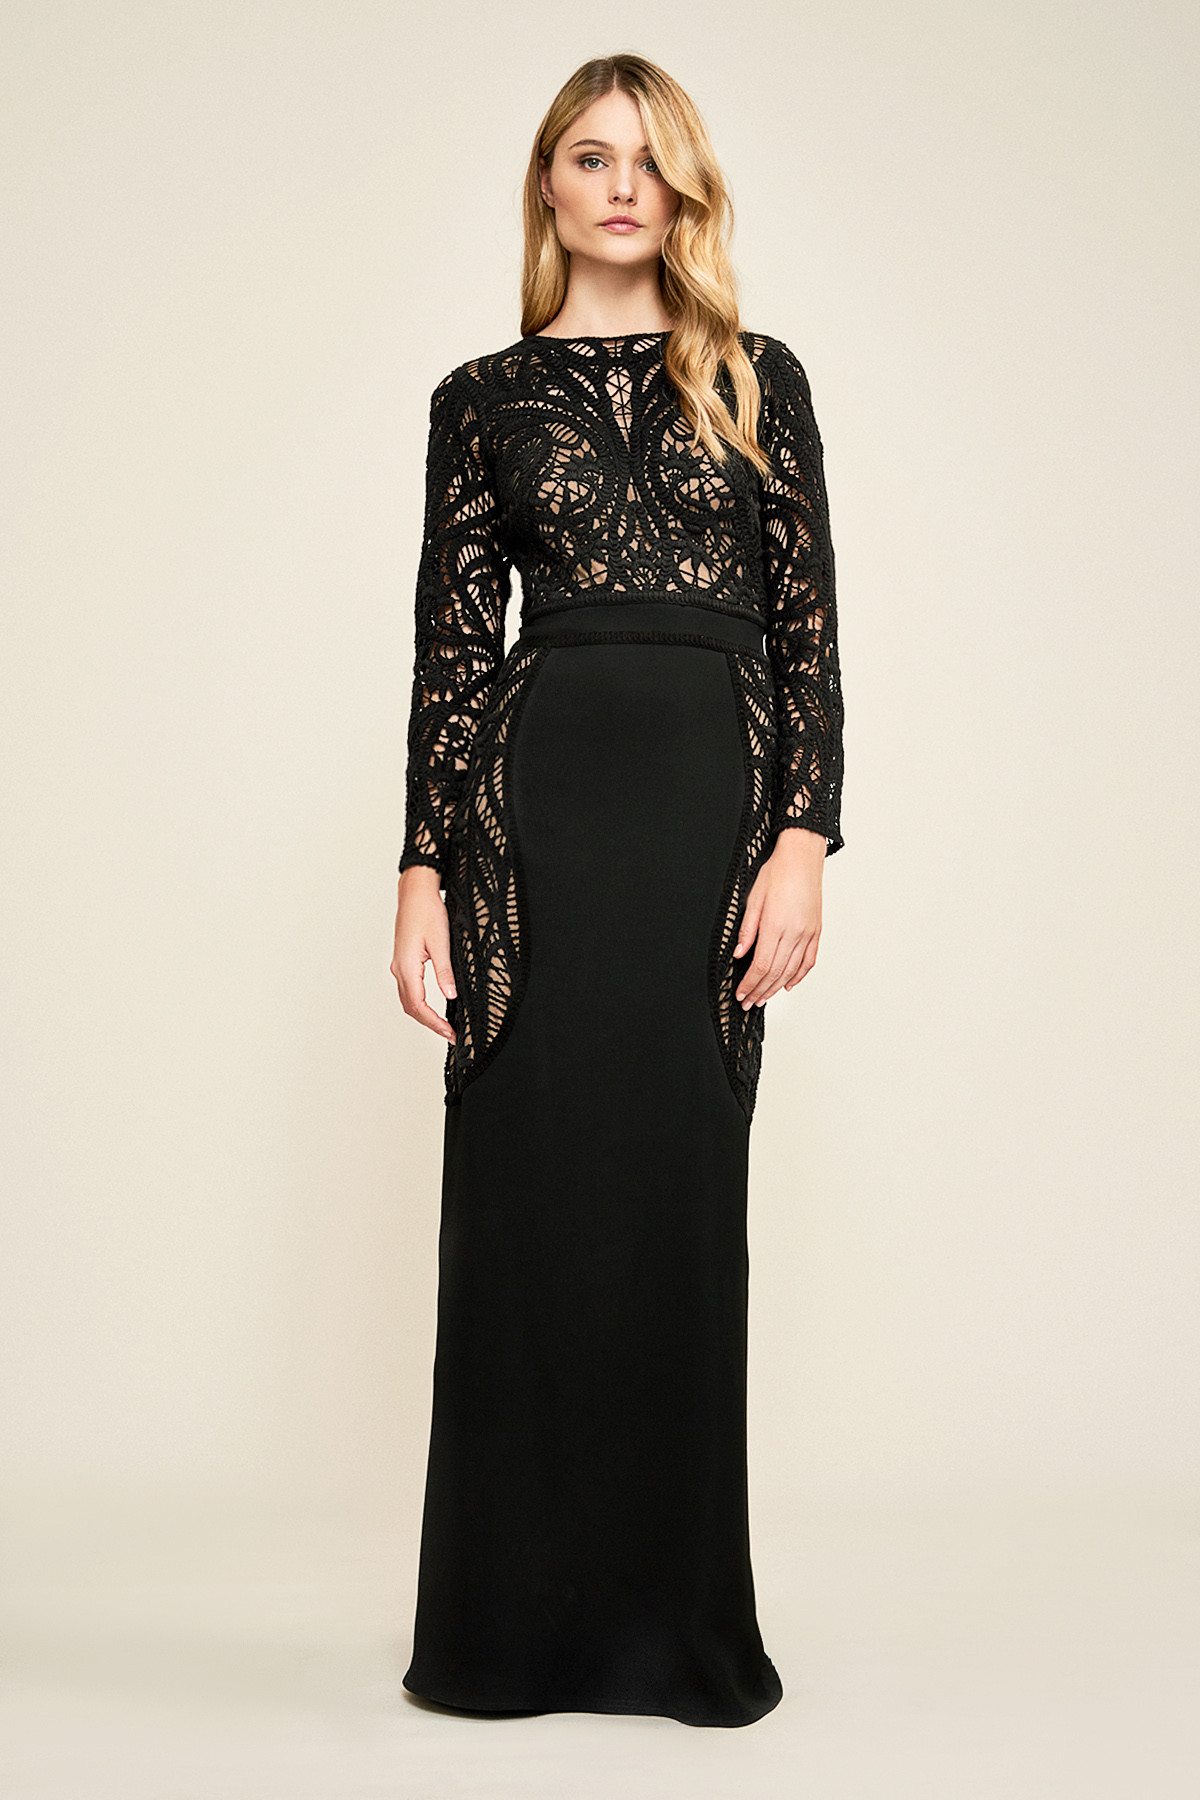 Blonde model posing in intricate lace black fitted full-length sheath Tadashi Shoji gown